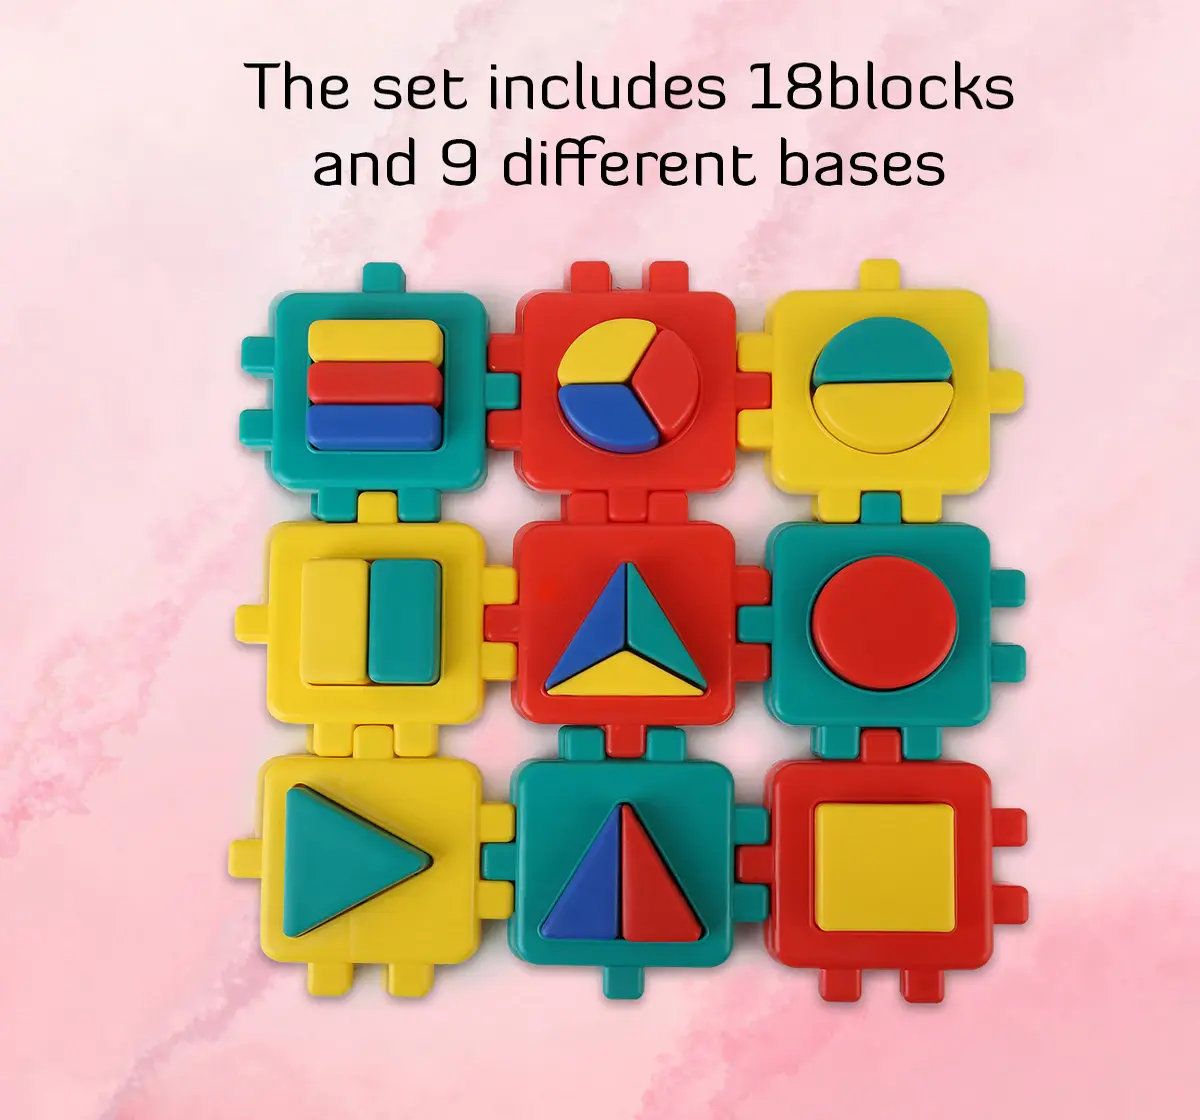 Ok Play Geometrical Genious Interlocking blocks Early learning educational toy for kids Multicolor 3Y+